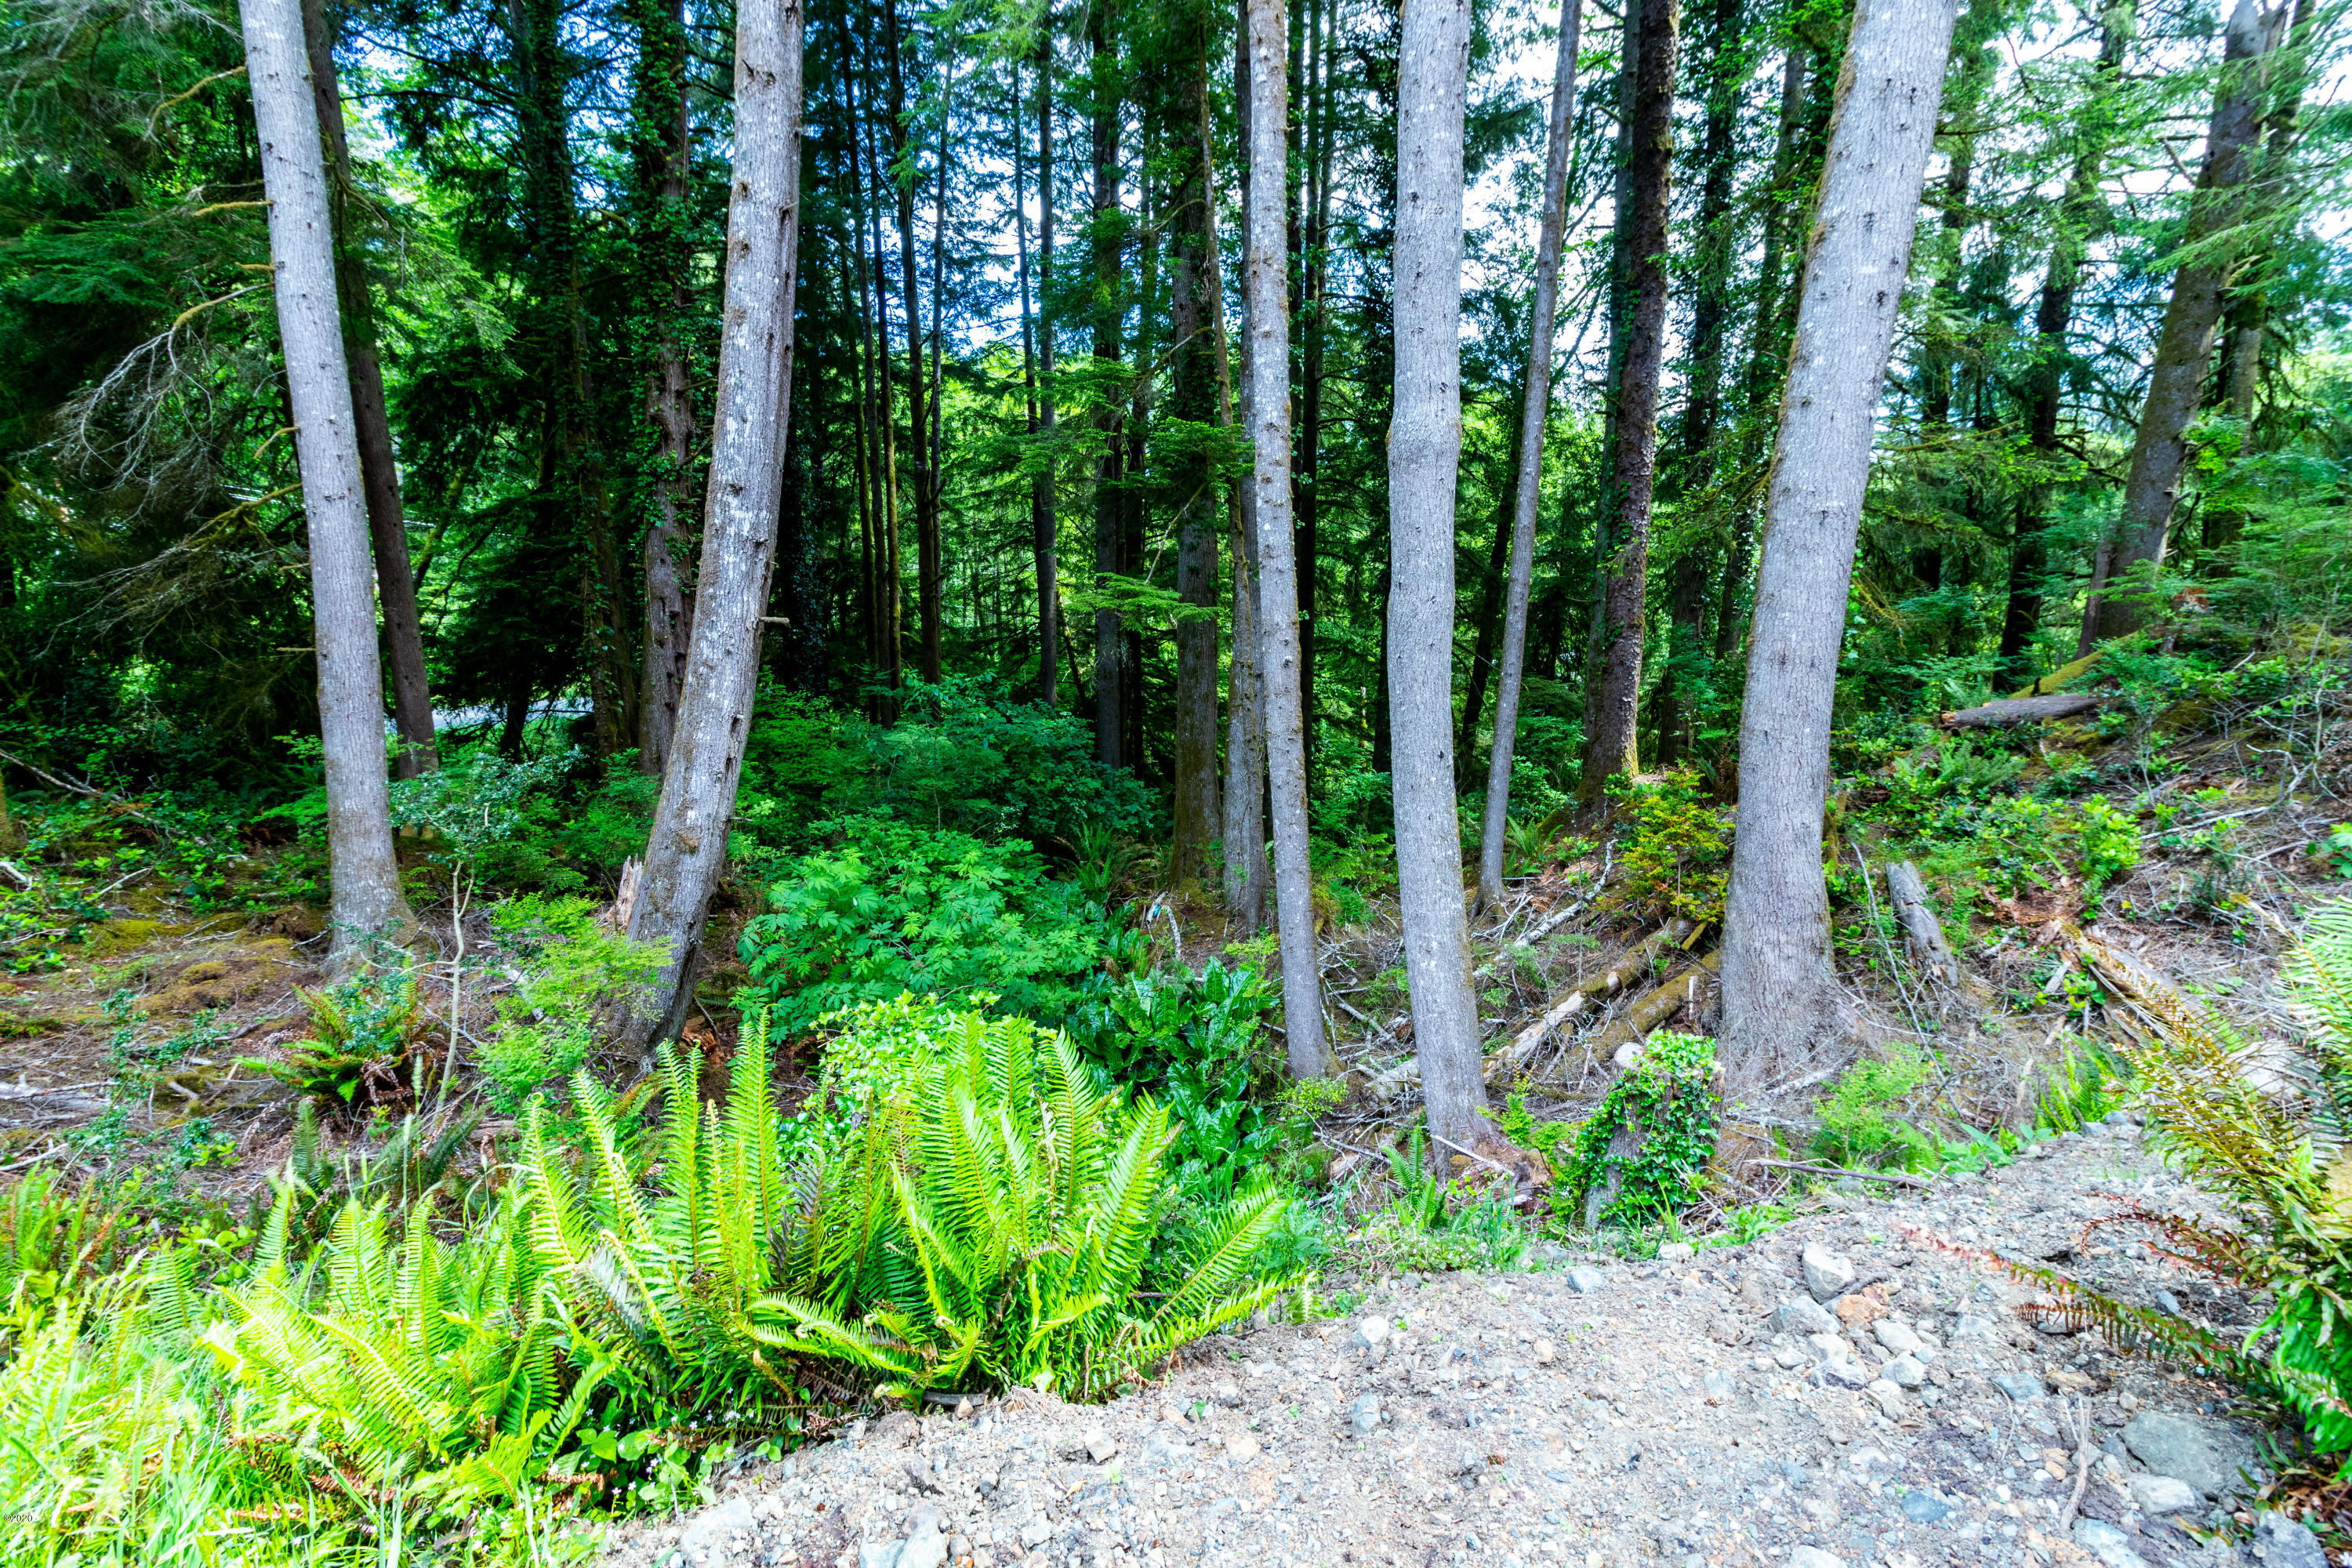 Lot 7 NE West Devils Lake Rd Depoe Bay, Gleneden Beach, Lincoln City, Newport, Otis, Rose Lodge, Seal Rock, Waldport, Yachats, To Home Listings - Amy Plechaty, Emerald Coast Realty Real Estate, homes for sale, property for sale